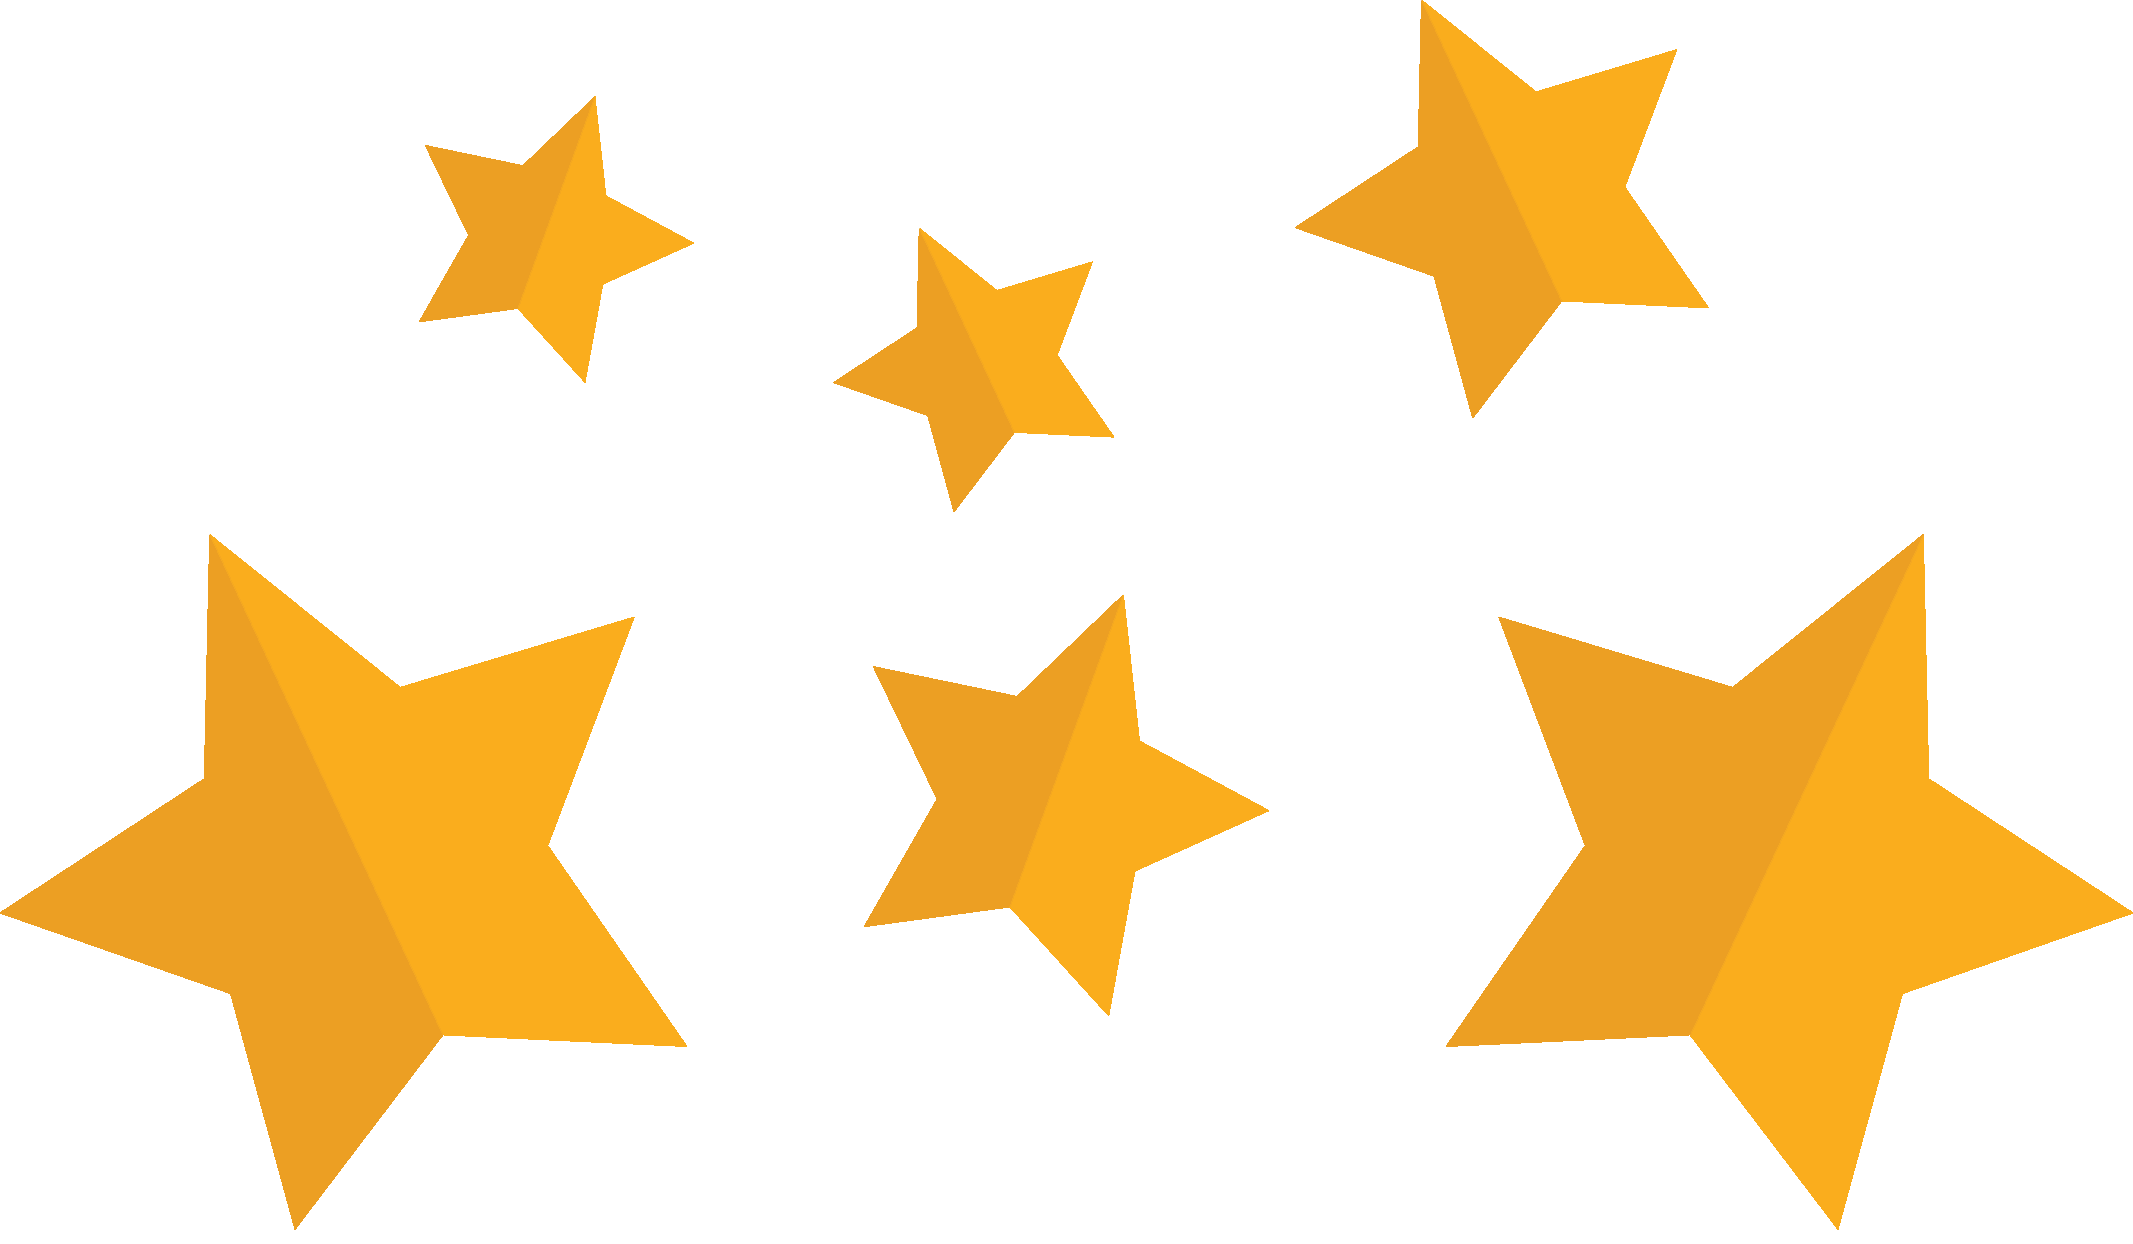 Stars PNG Transparent Stars.PNG Images. | PlusPNG